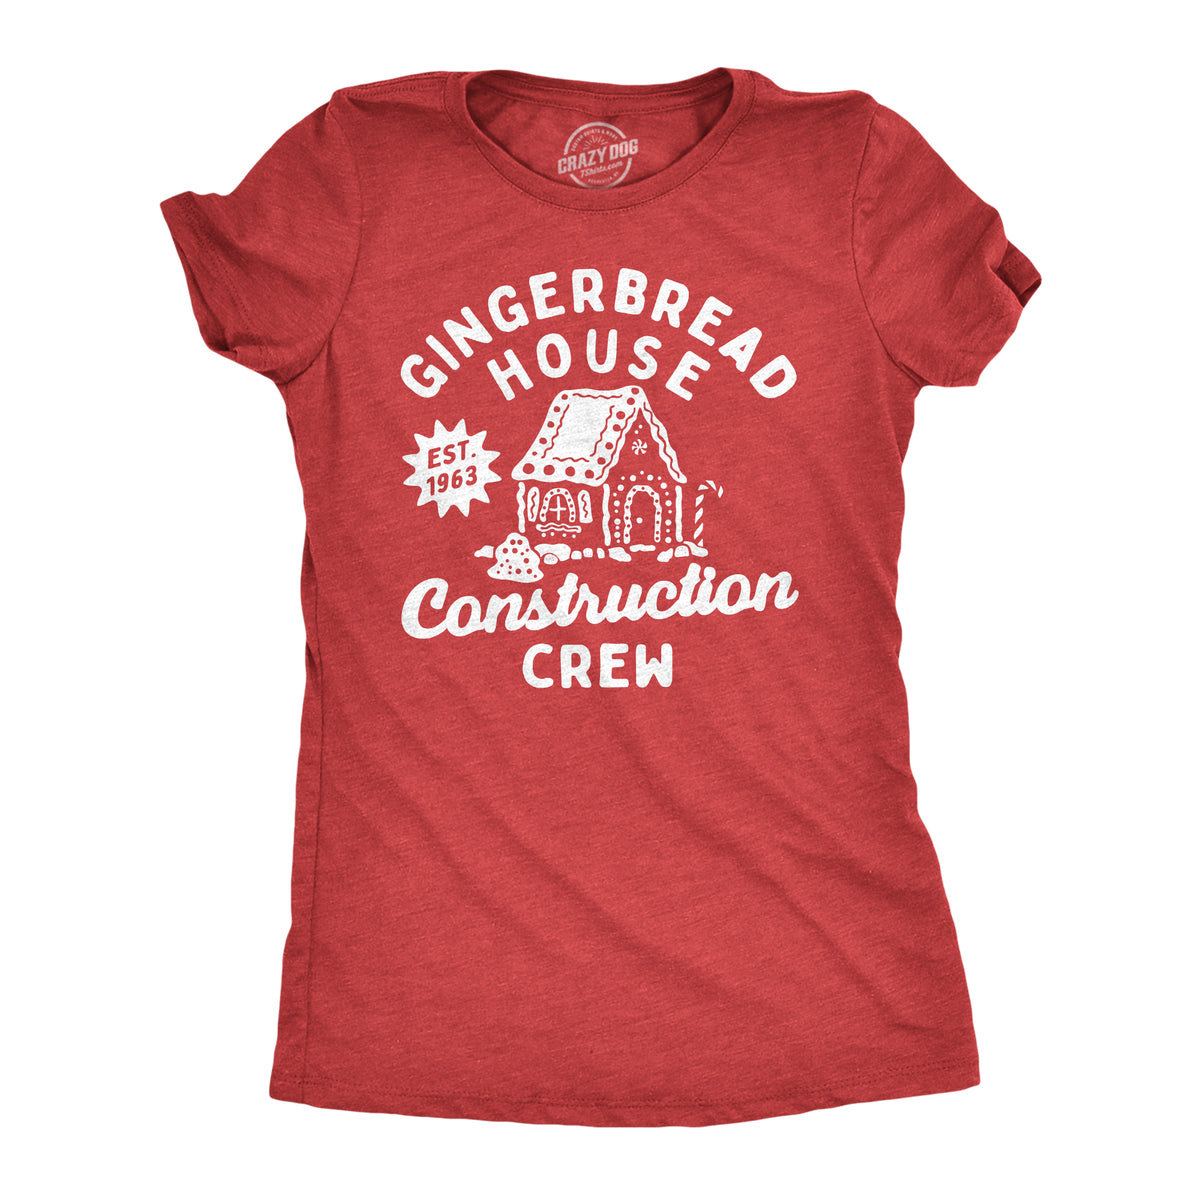 Funny Heather Red - CONSTRUCTION Gingerbread House Construction Crew Womens T Shirt Nerdy Christmas sarcastic Tee